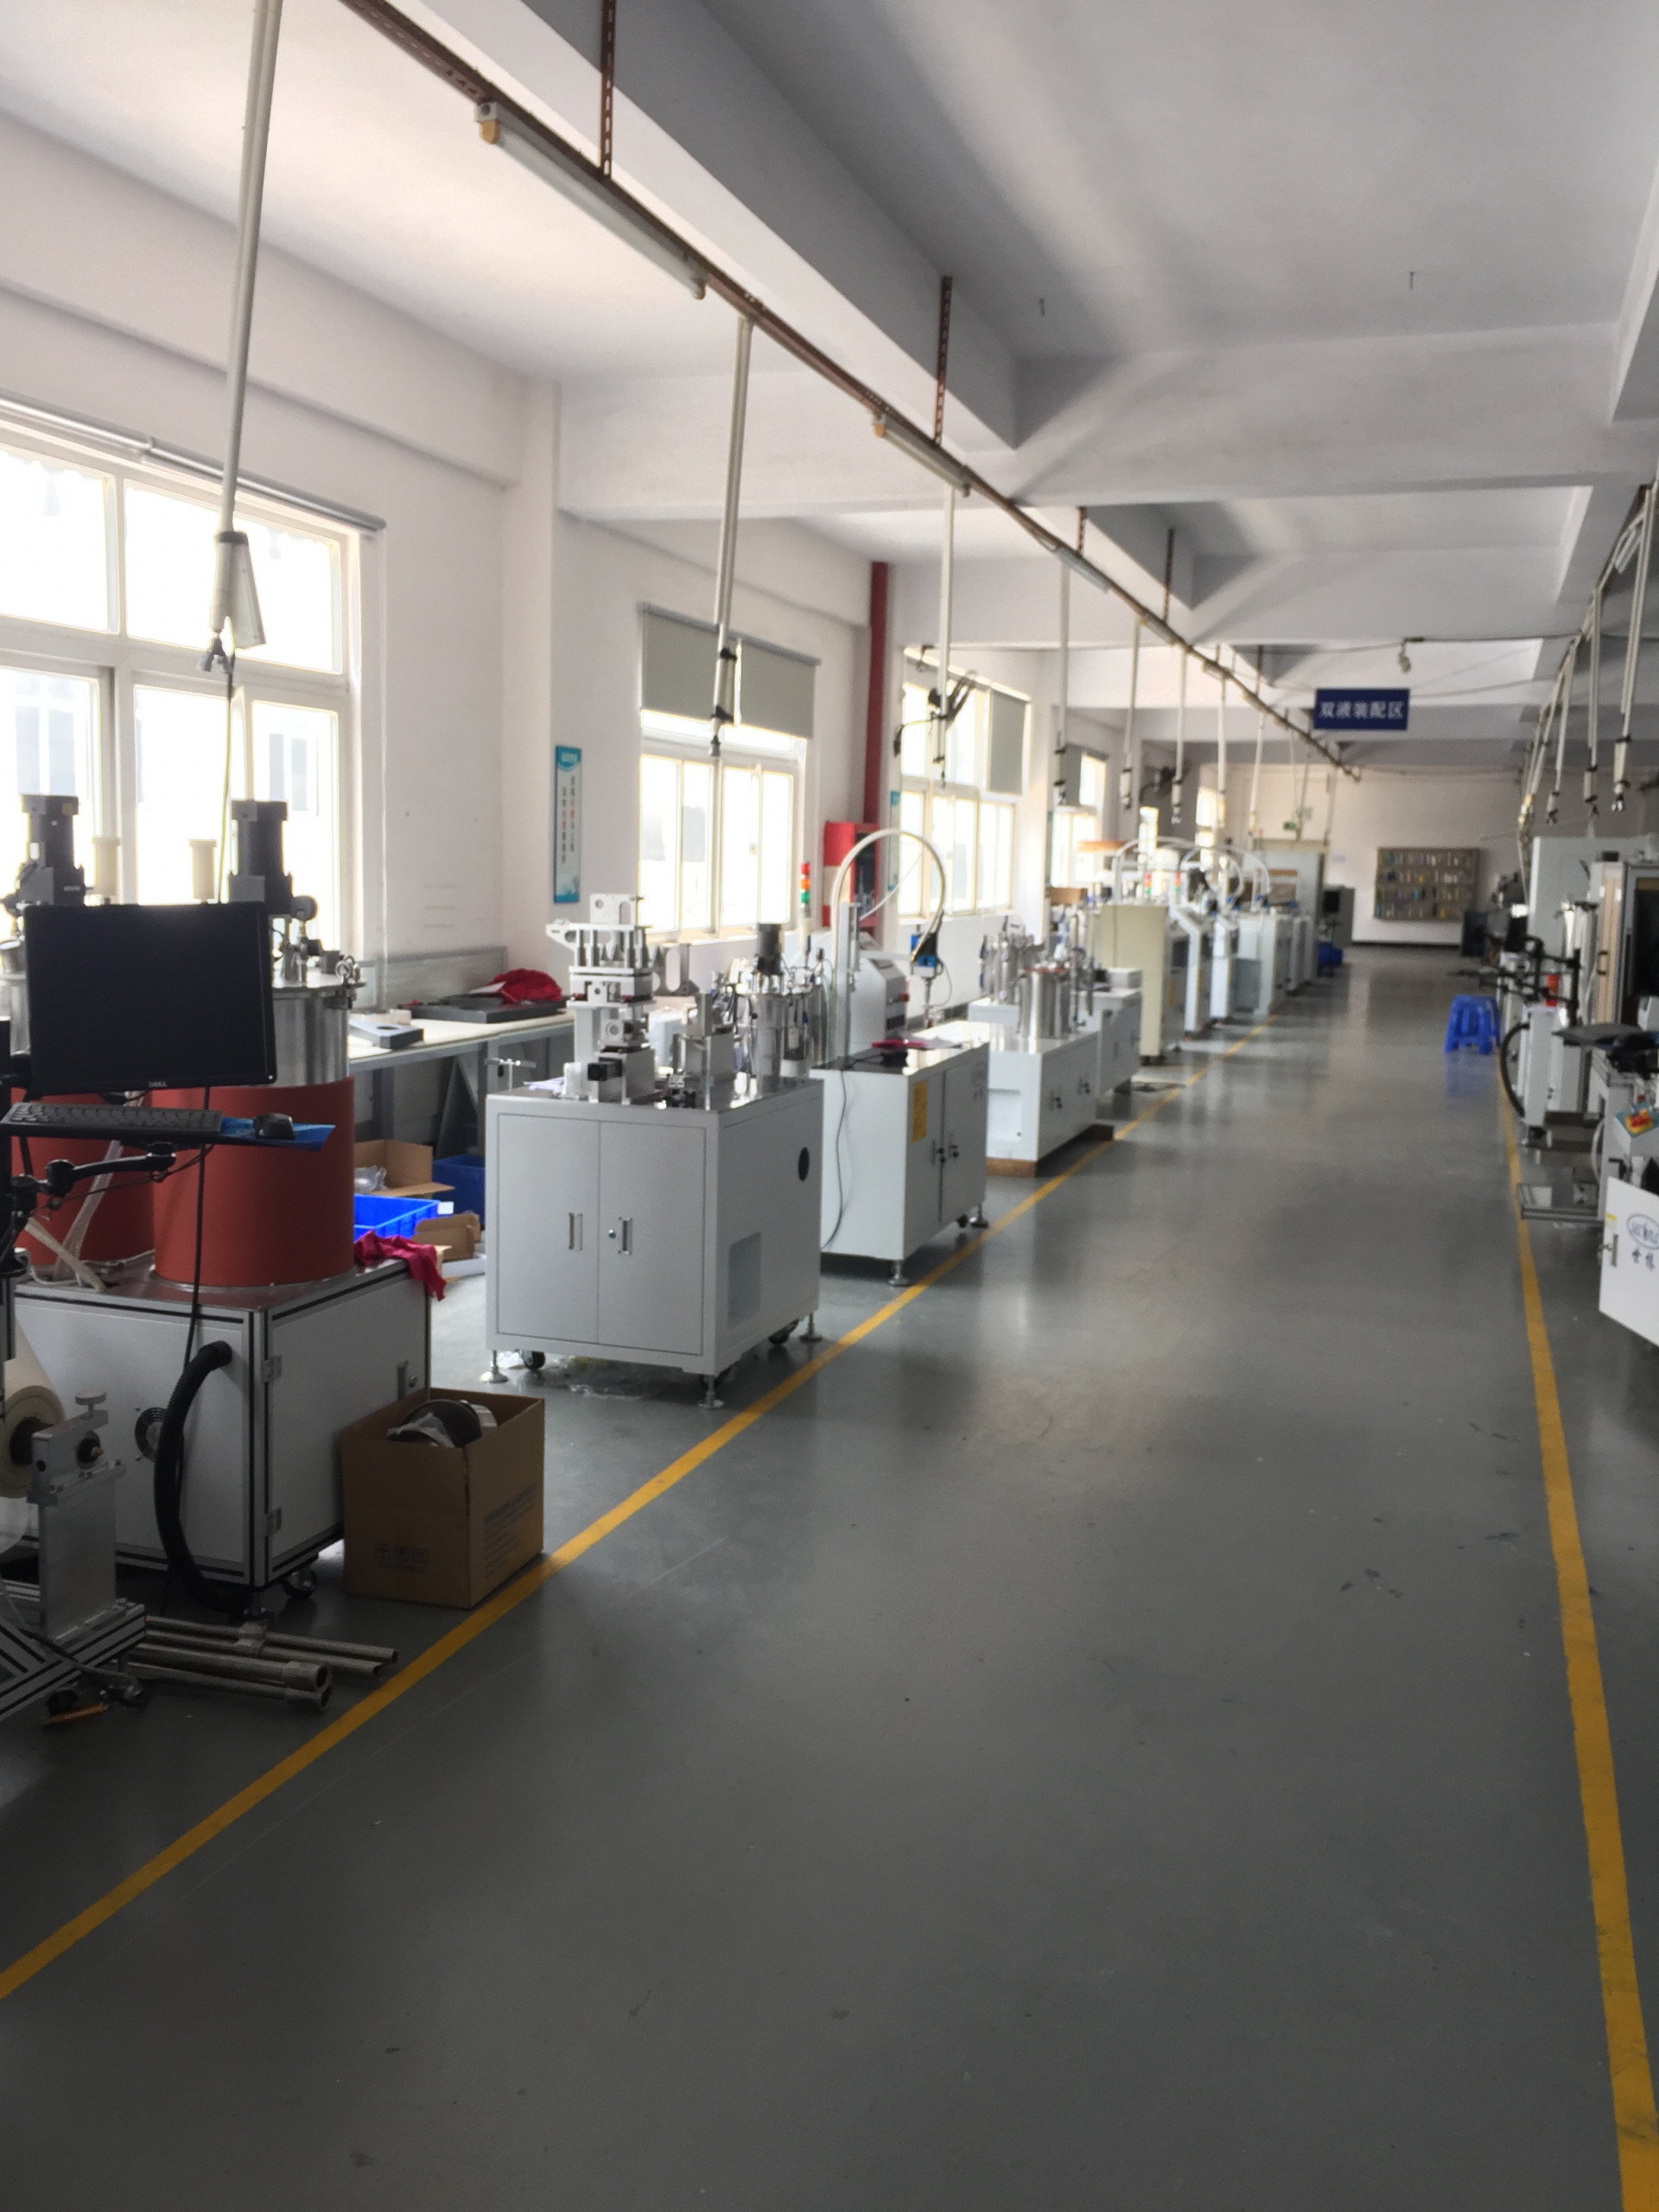 2-parts industrial fluid glue auto ratio mixing and potting machine 3